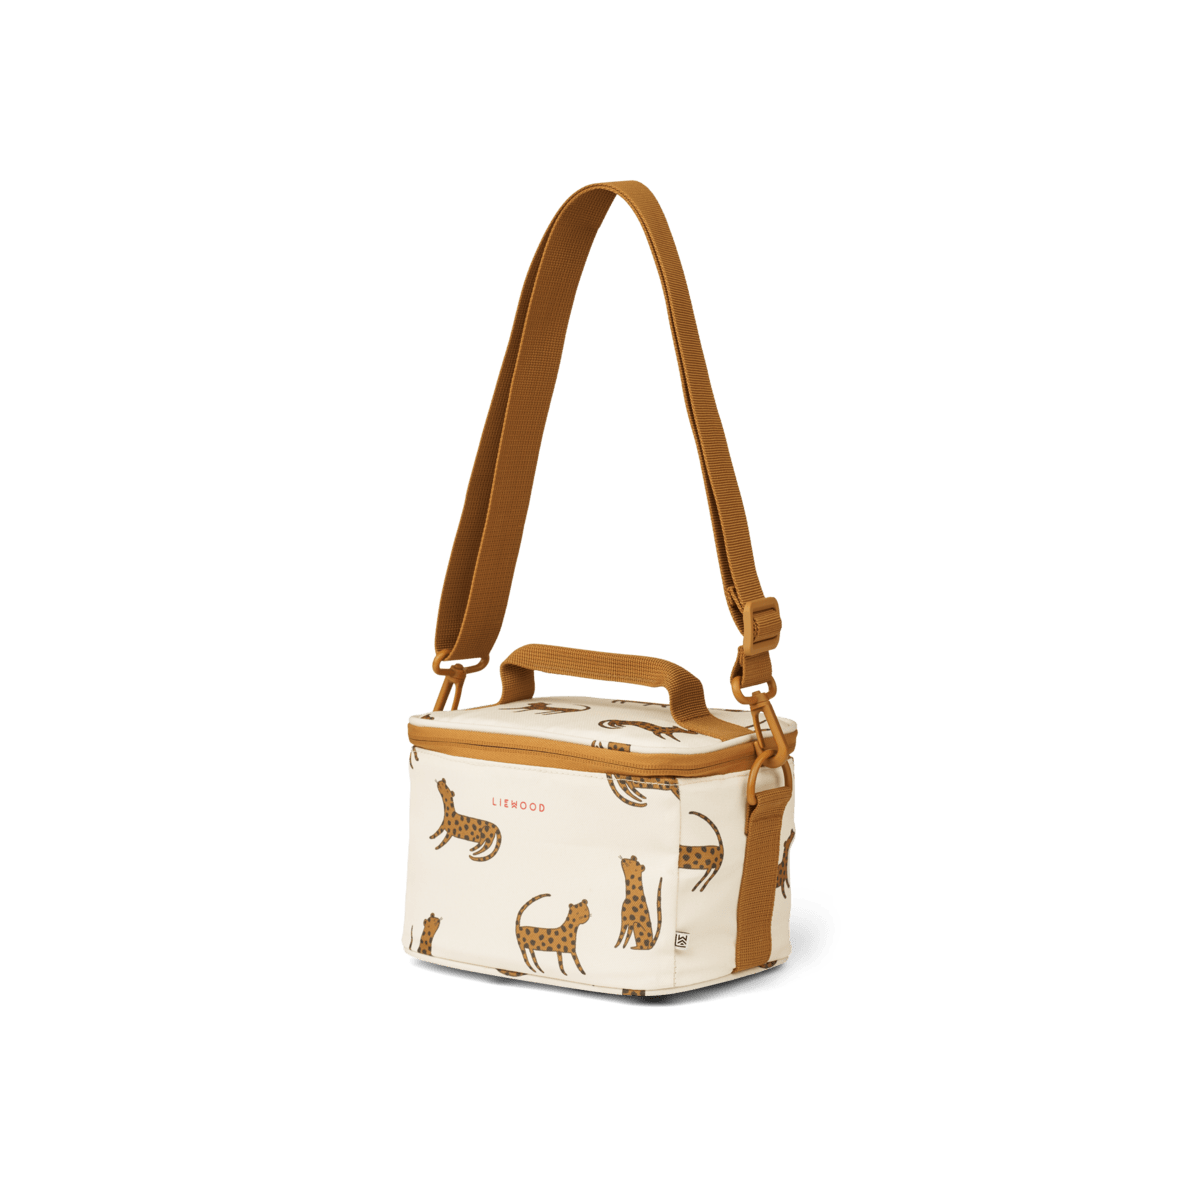 Toby Thermotasche leopard/sandy